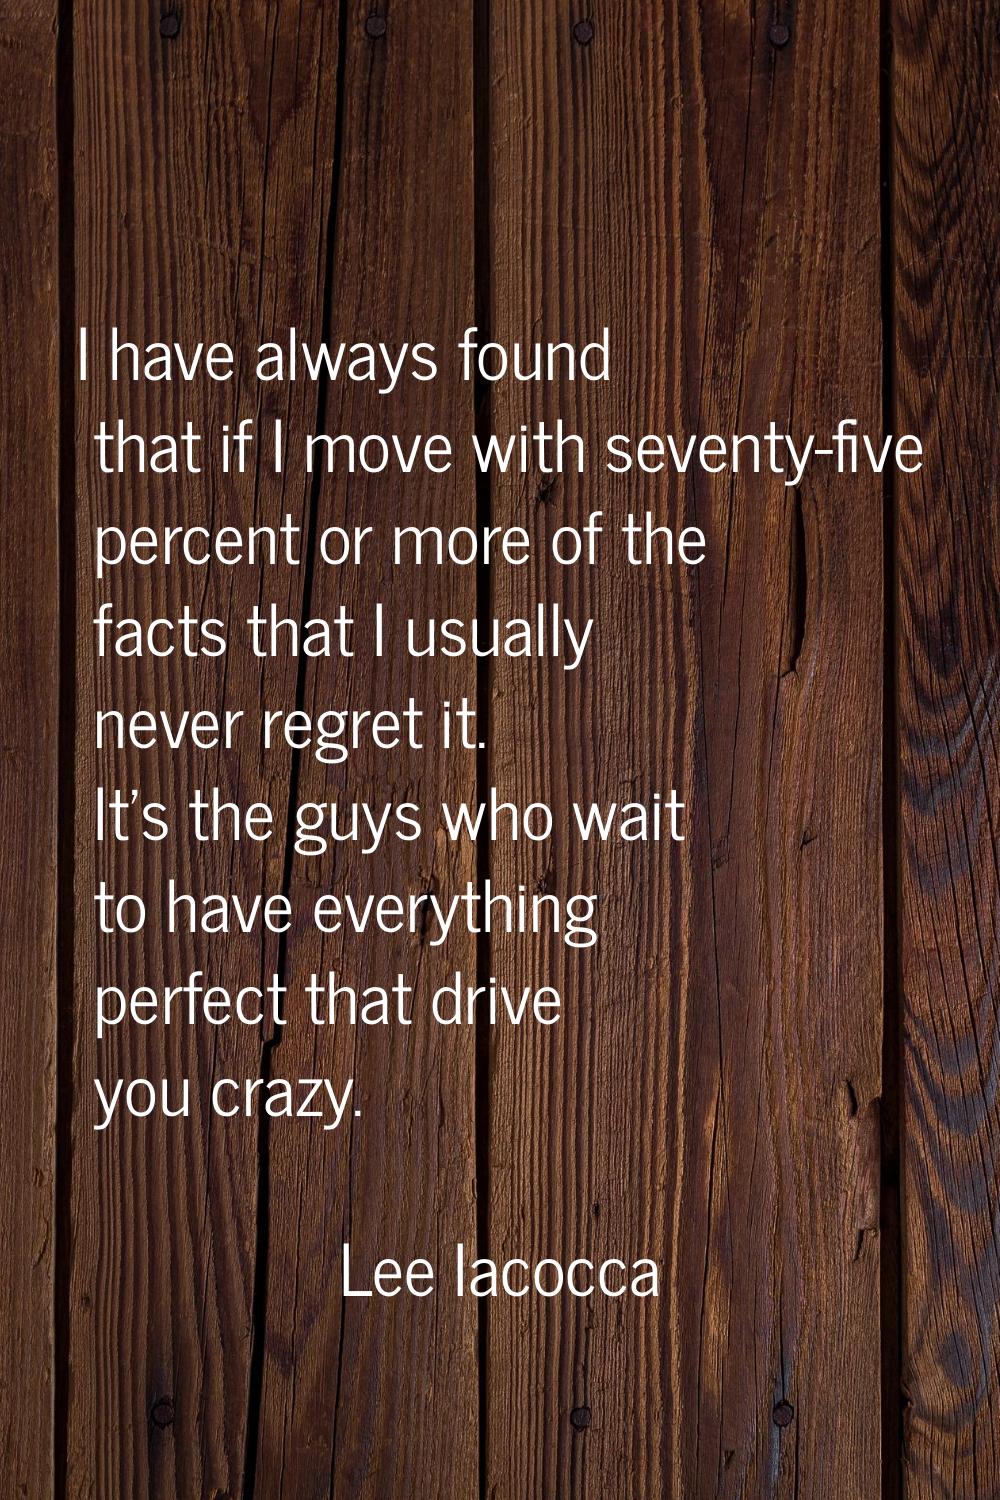 I have always found that if I move with seventy-five percent or more of the facts that I usually ne